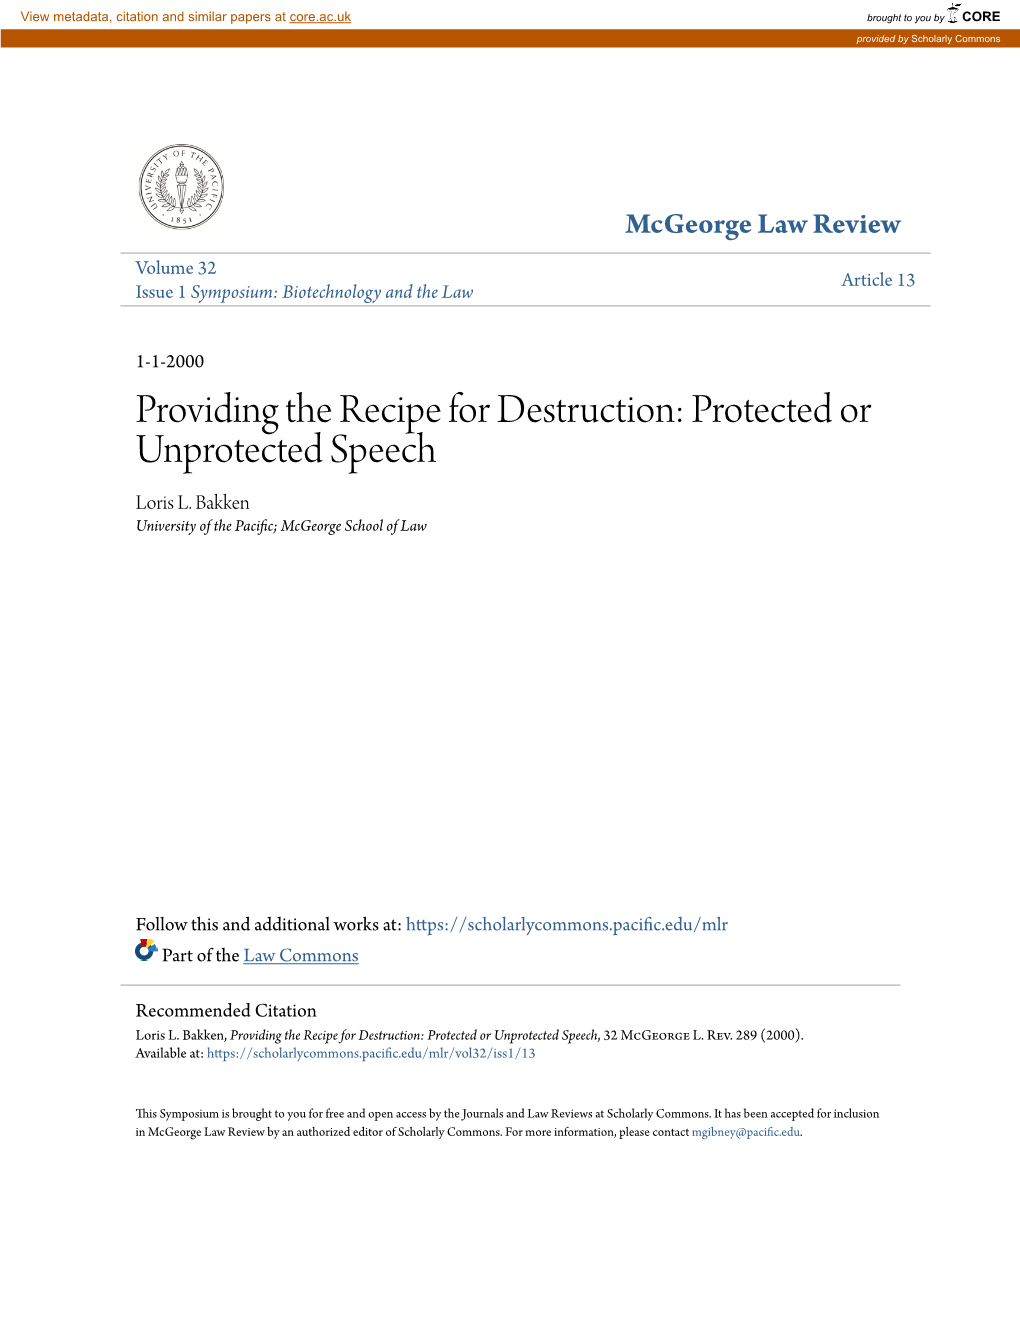 Providing the Recipe for Destruction: Protected Or Unprotected Speech Loris L